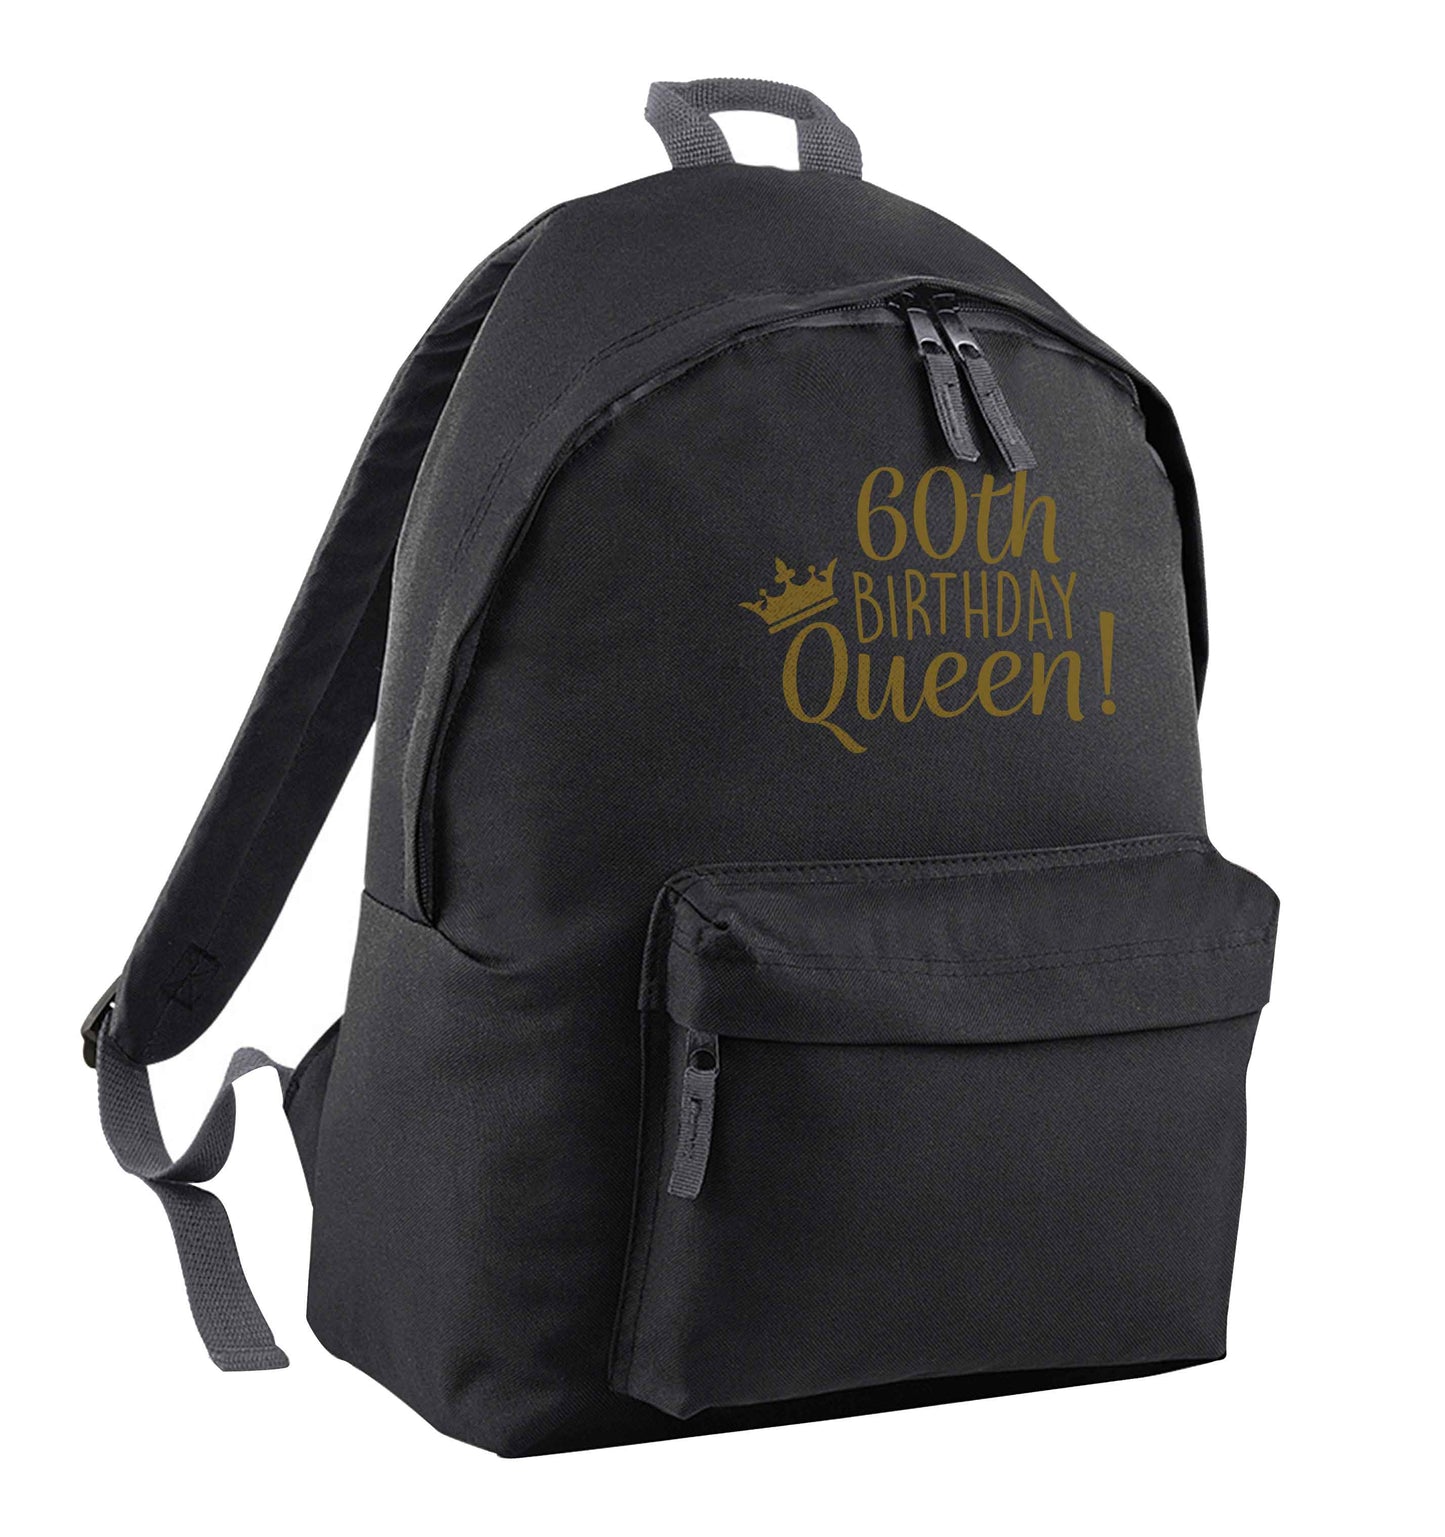 60th birthday Queen black adults backpack